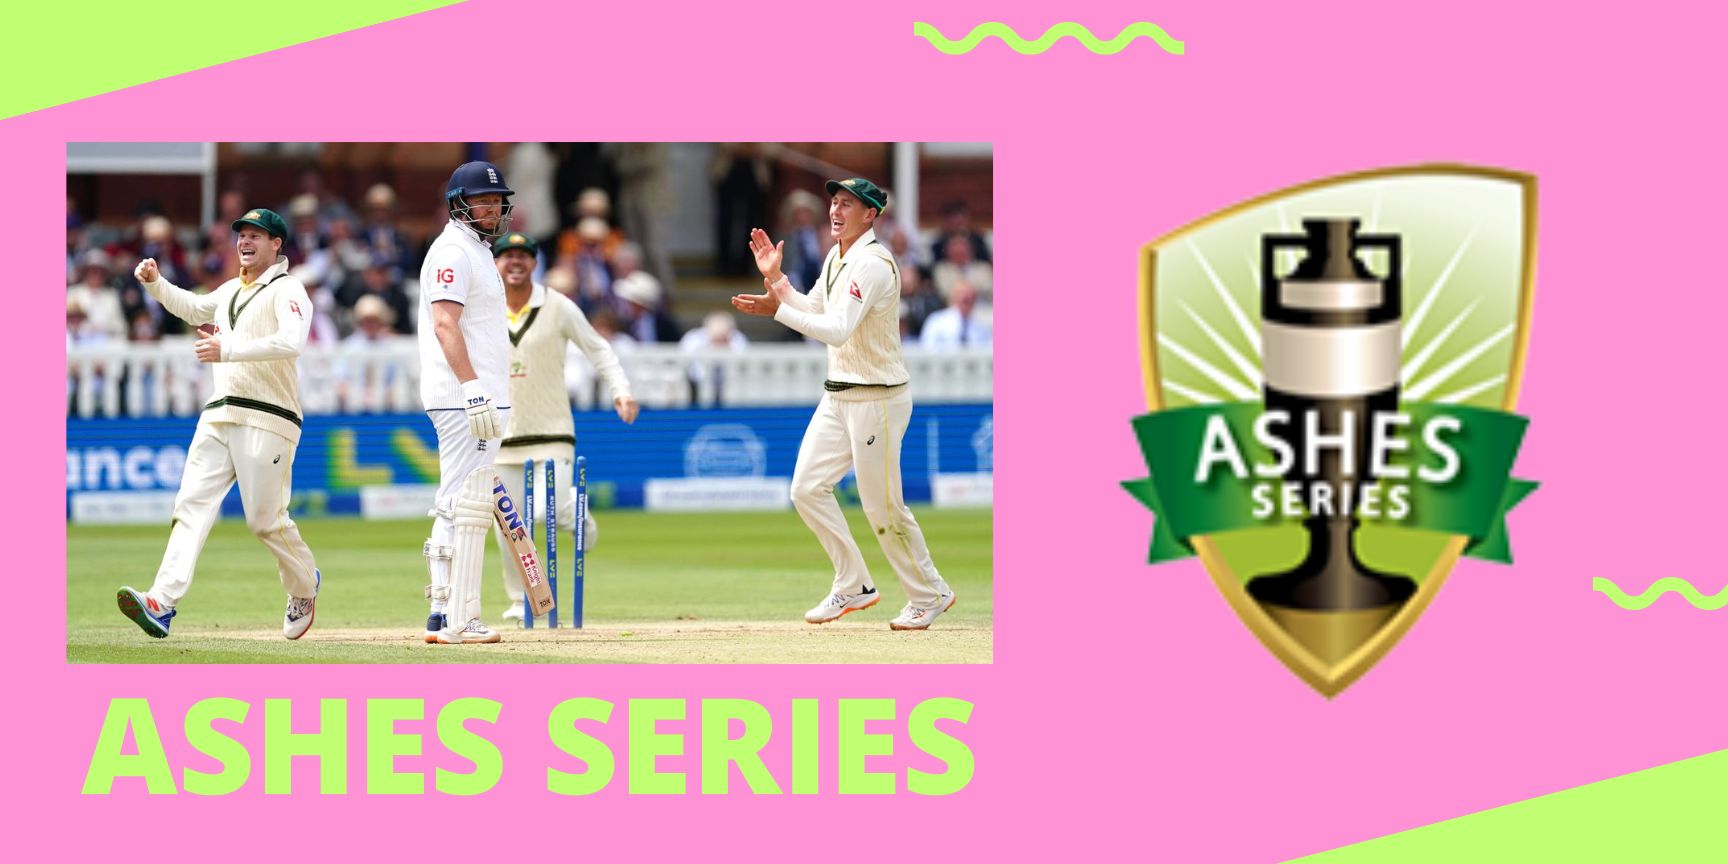 Ashes Series Cricket Tournament overview